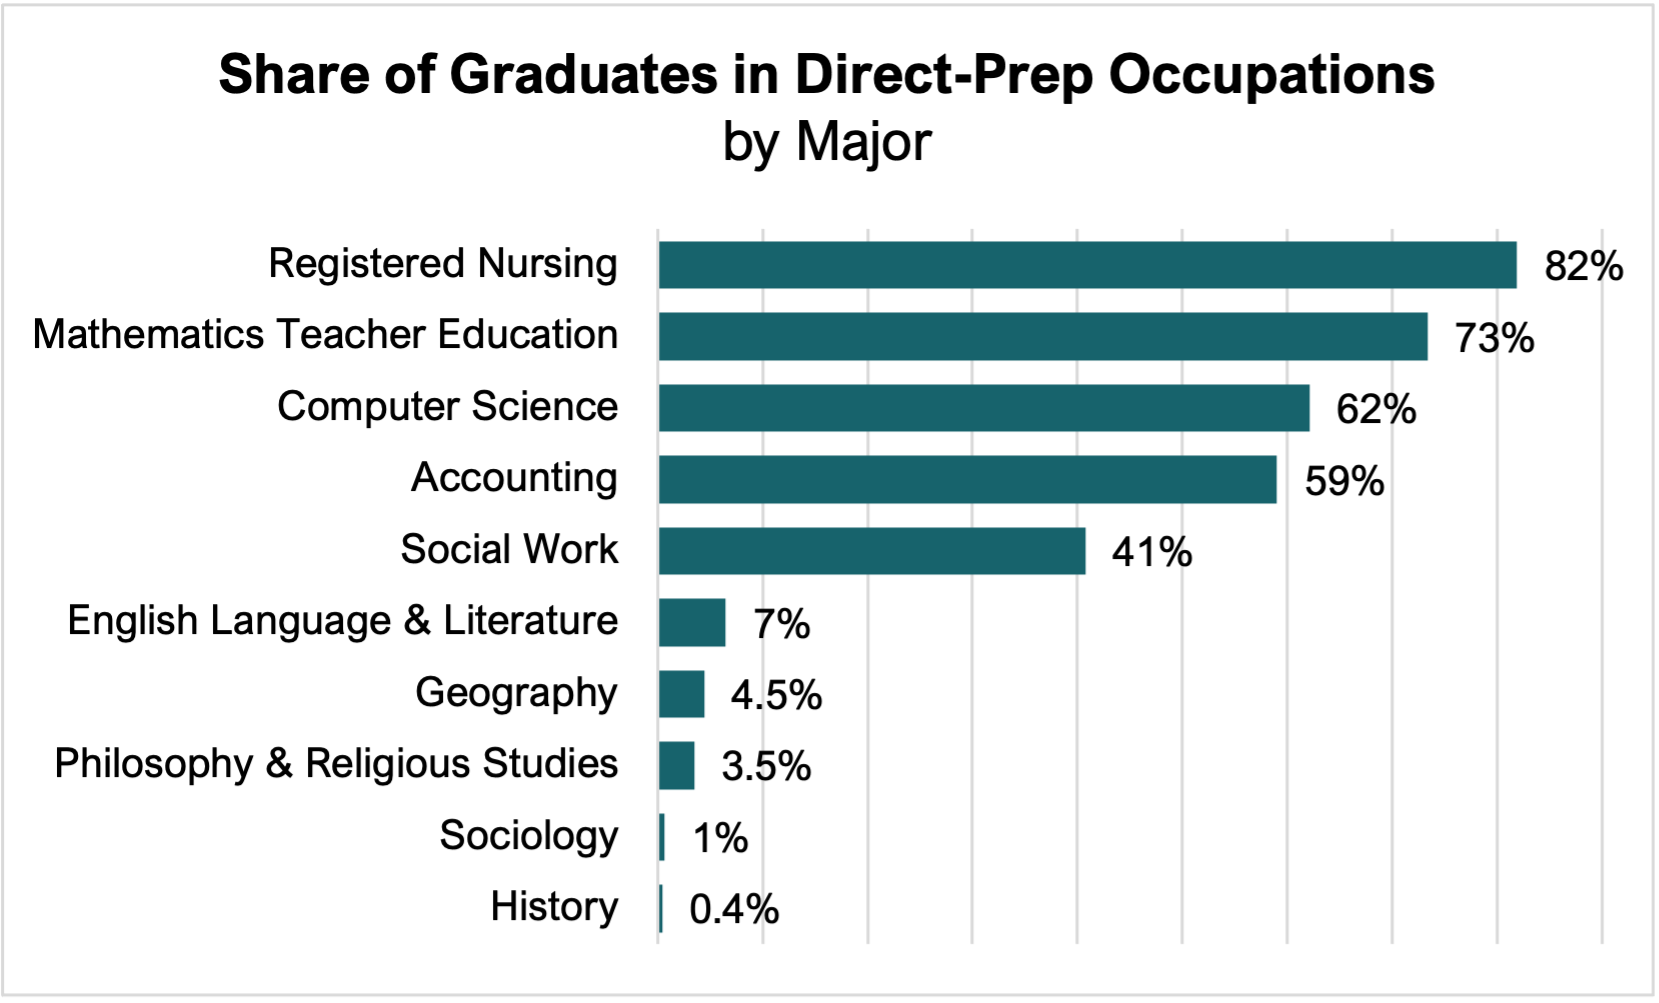 Bar chart showing the share of graduates in direct-prep occupations by major. 